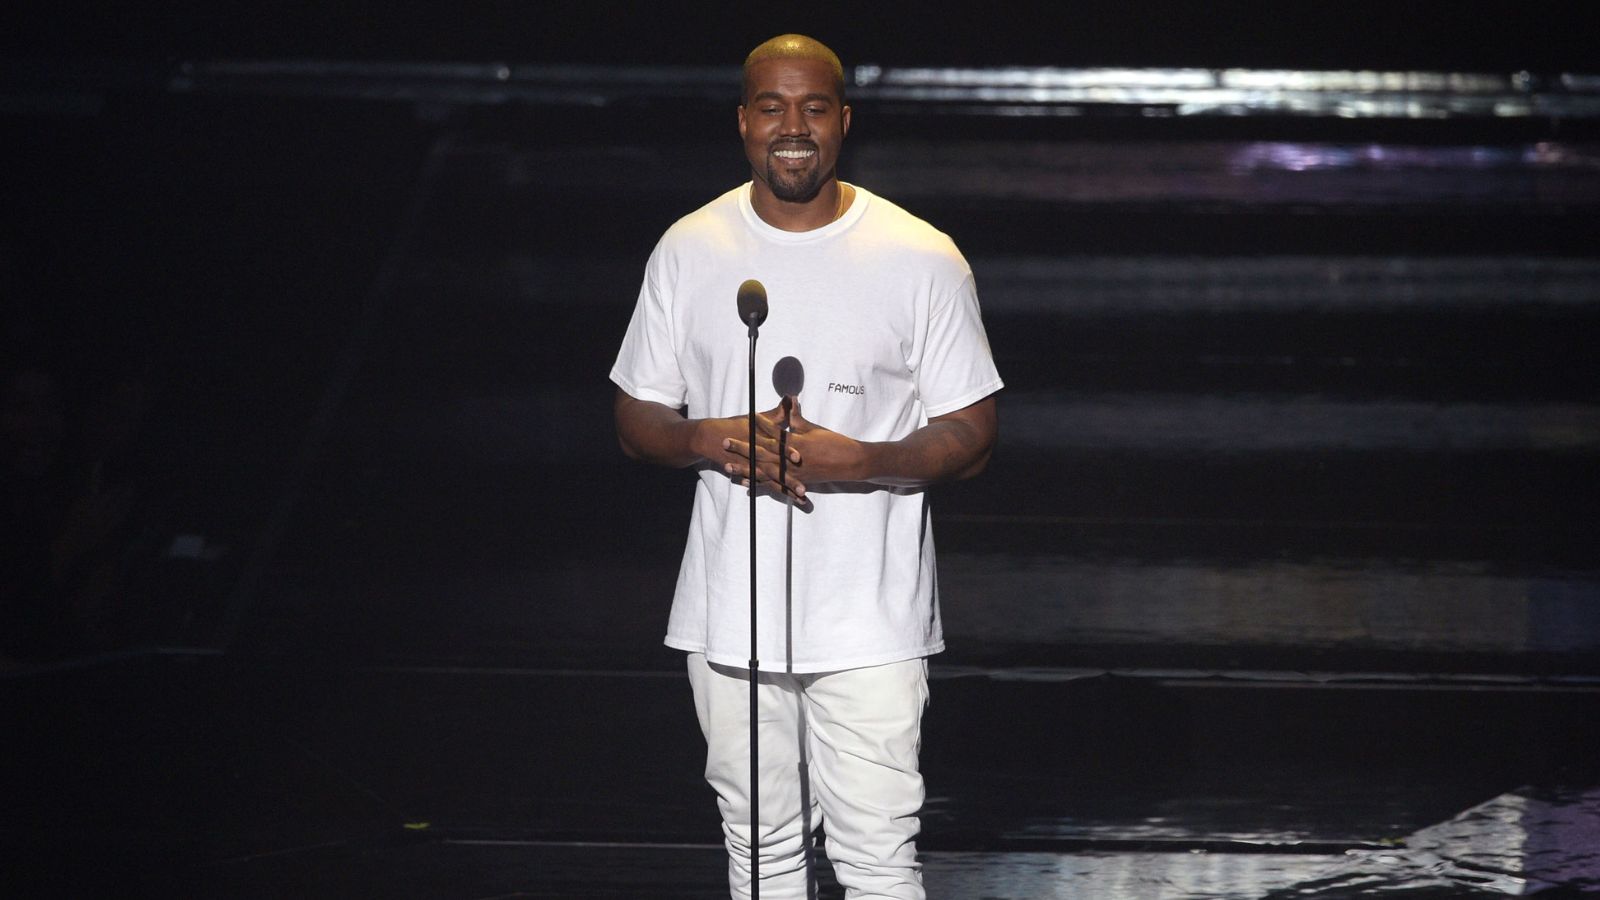 Kanye West claims he was drugged into being “a manageable well-behaved celebrity”